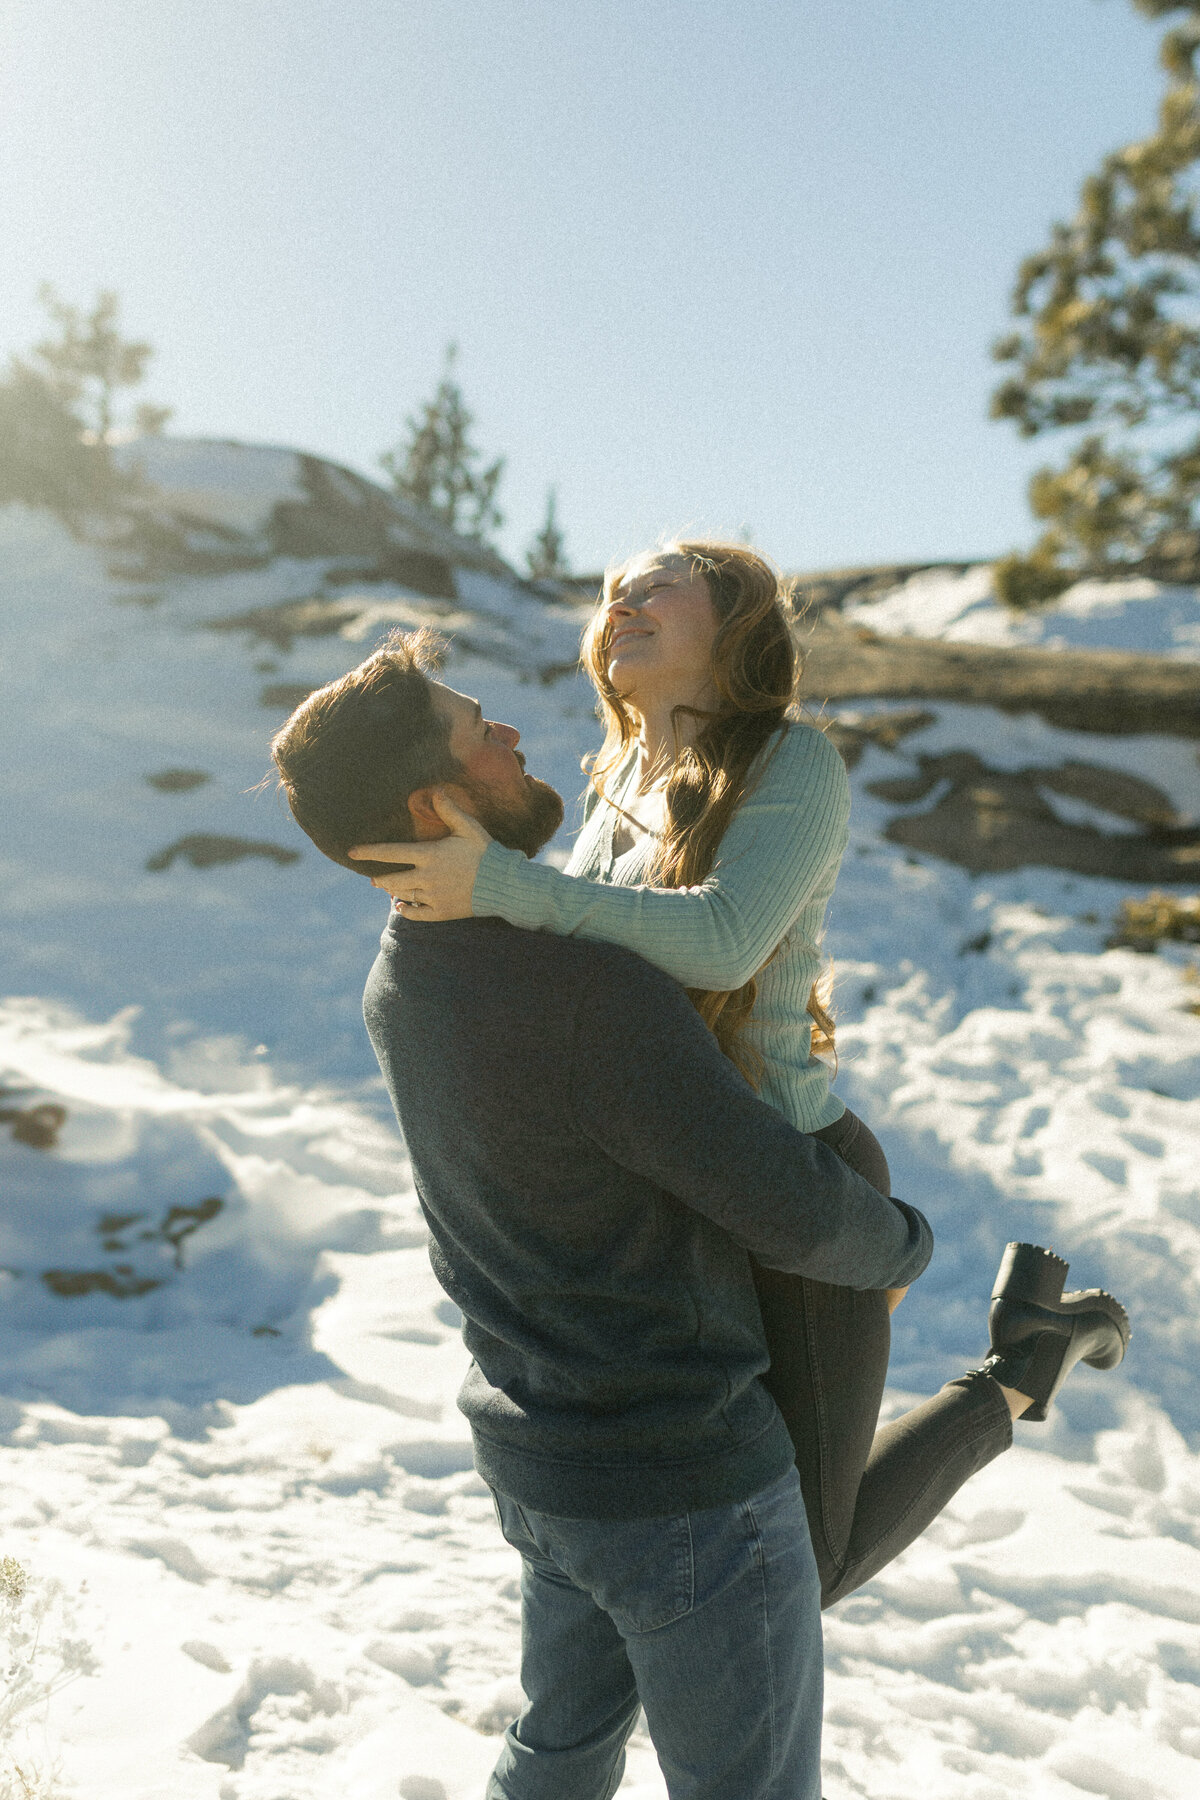 Guy picking up girl in snow during winter engagement session in mountains